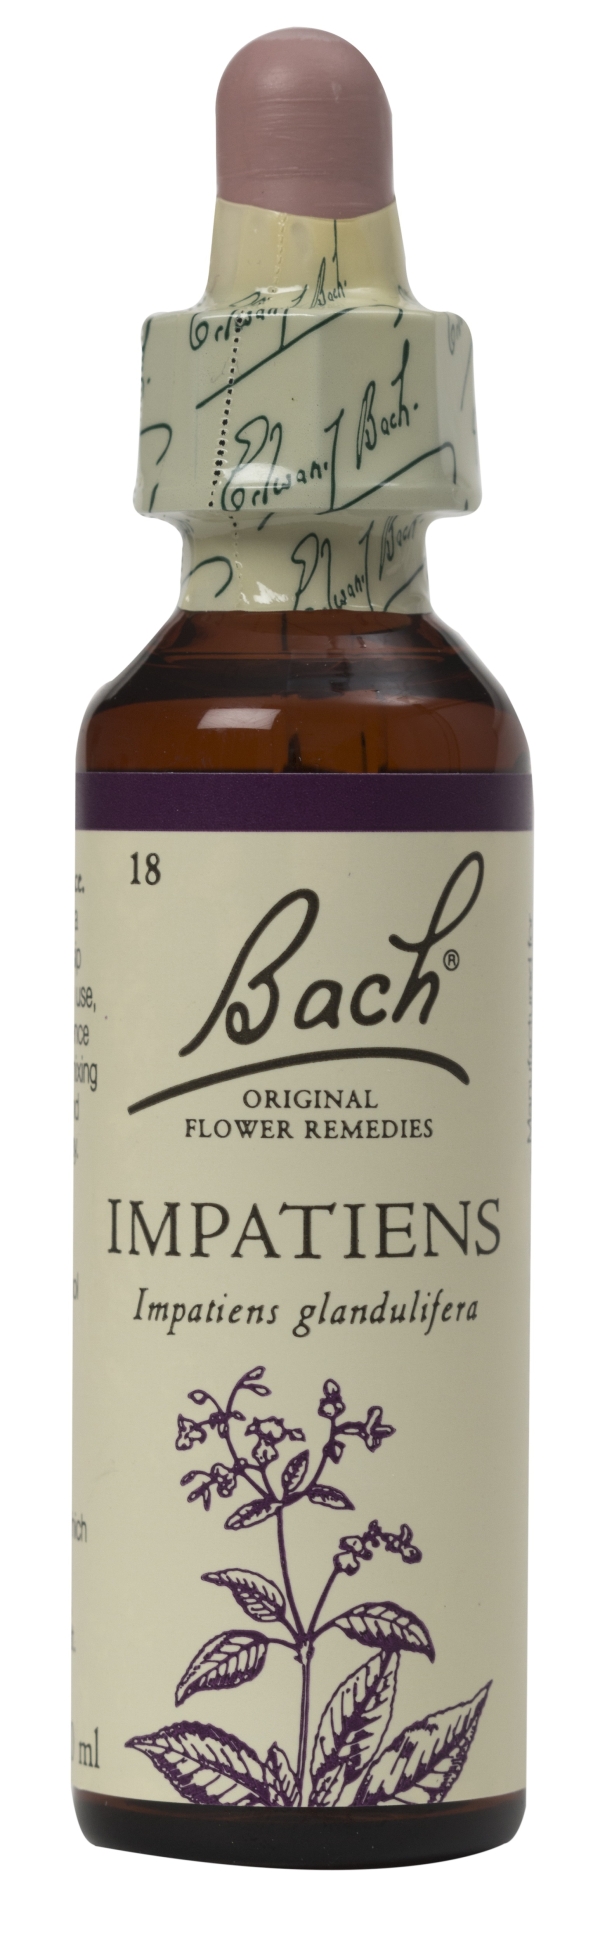 Nelson Bach Flower Remedies: Bach Impatiens Flower Remedy (20ml) available online here